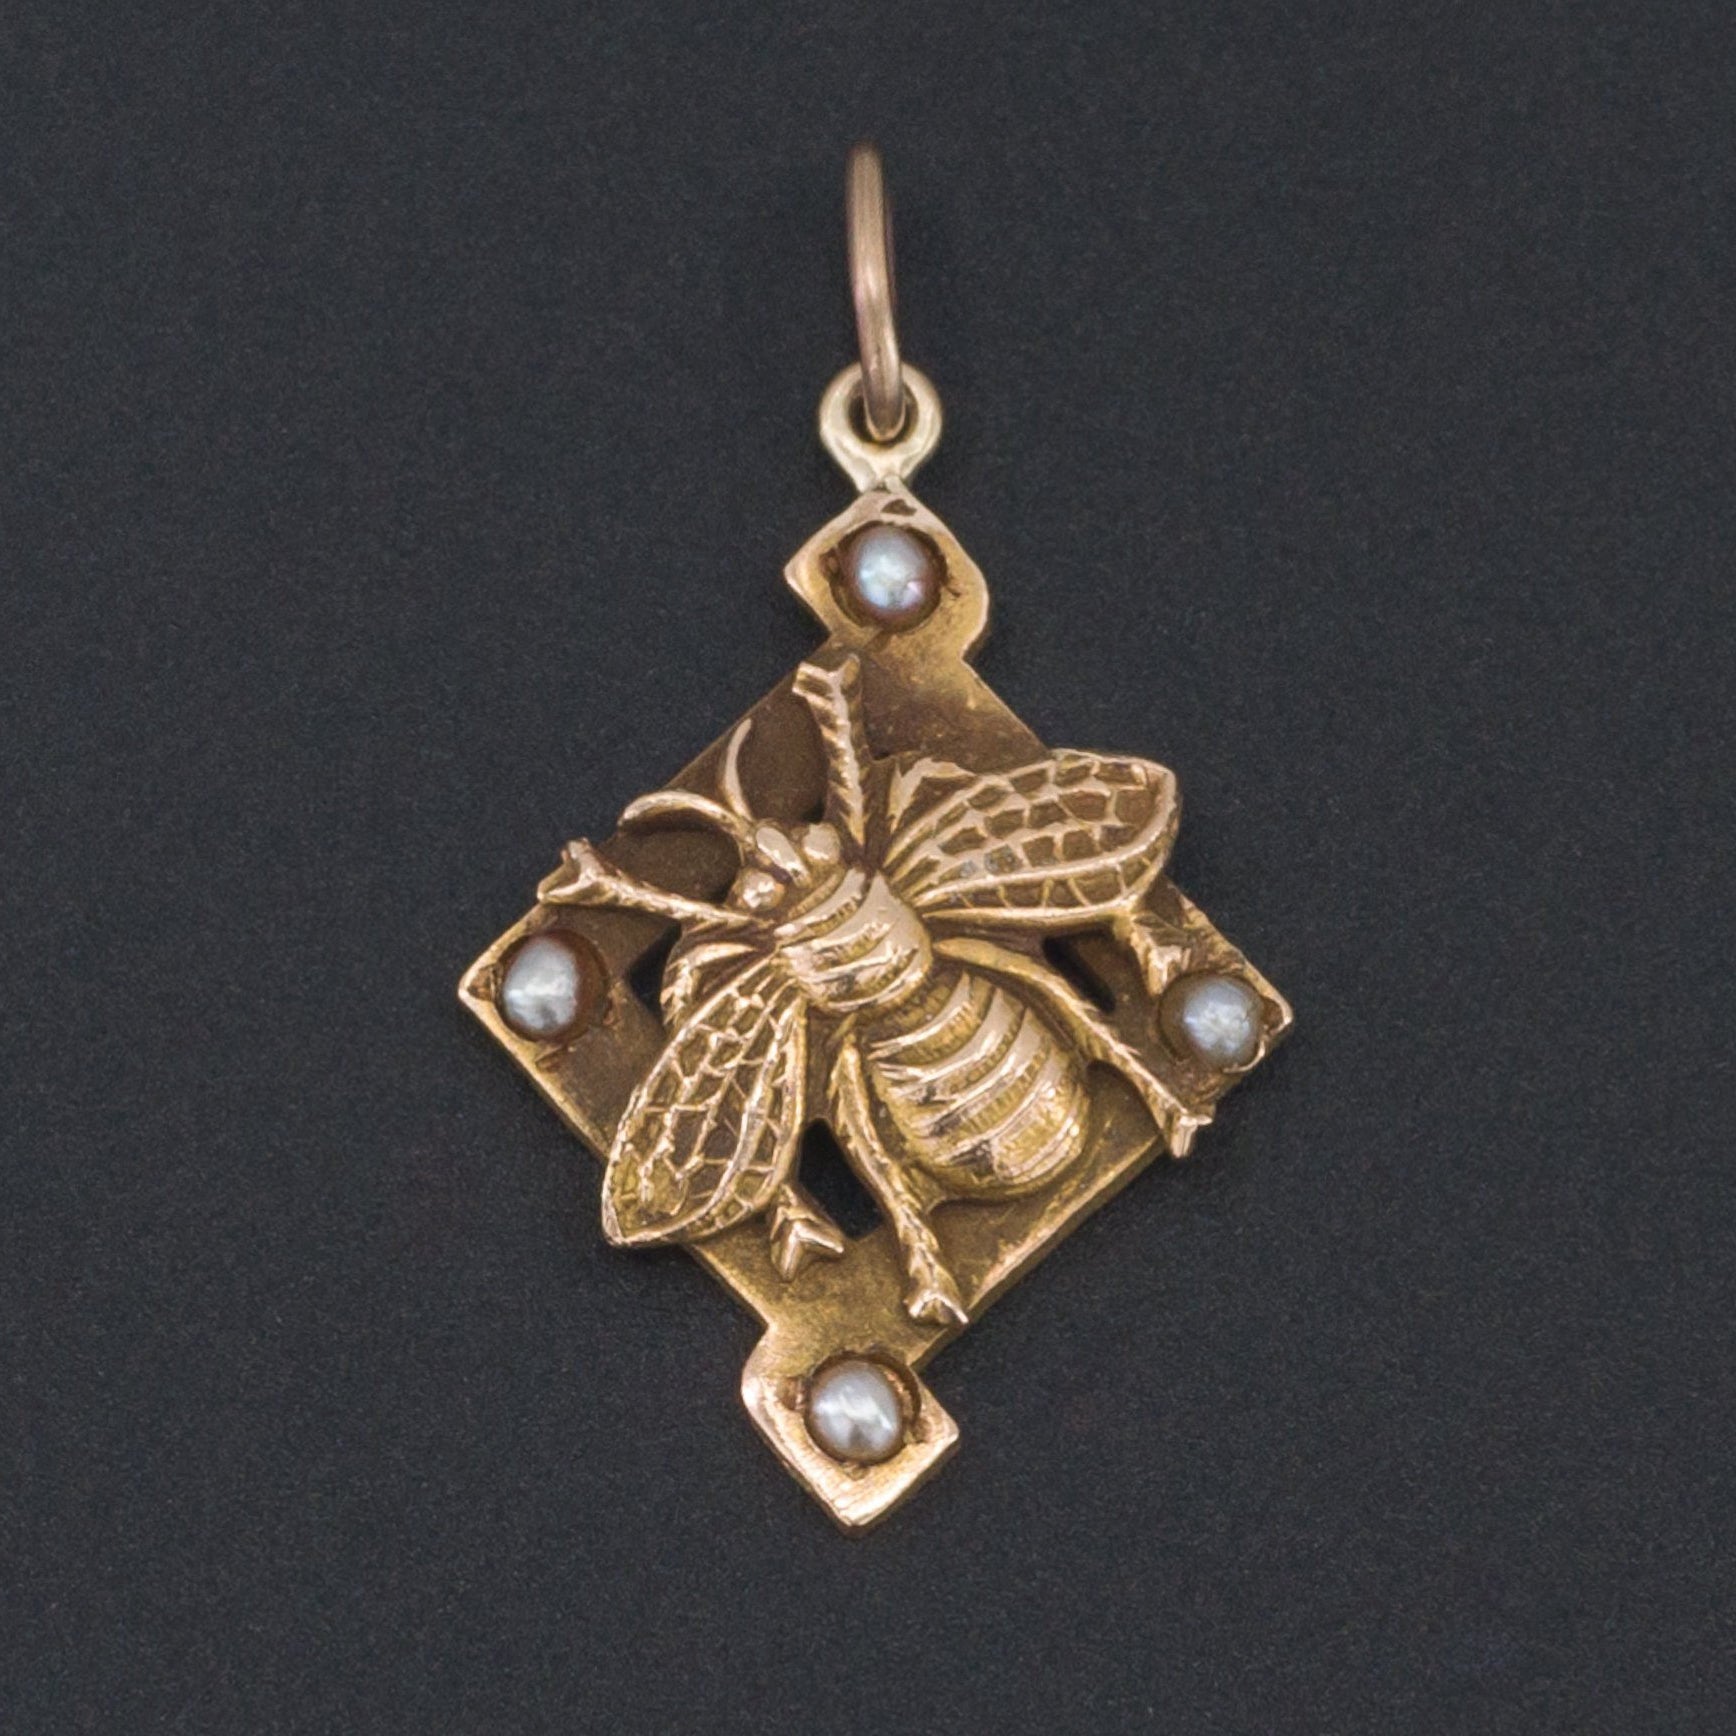 Bee Charm | 10k Gold Bee Charm or Pendant | Antique Pin Conversion | Bee Pendant | 10k Gold & Pearl Charm